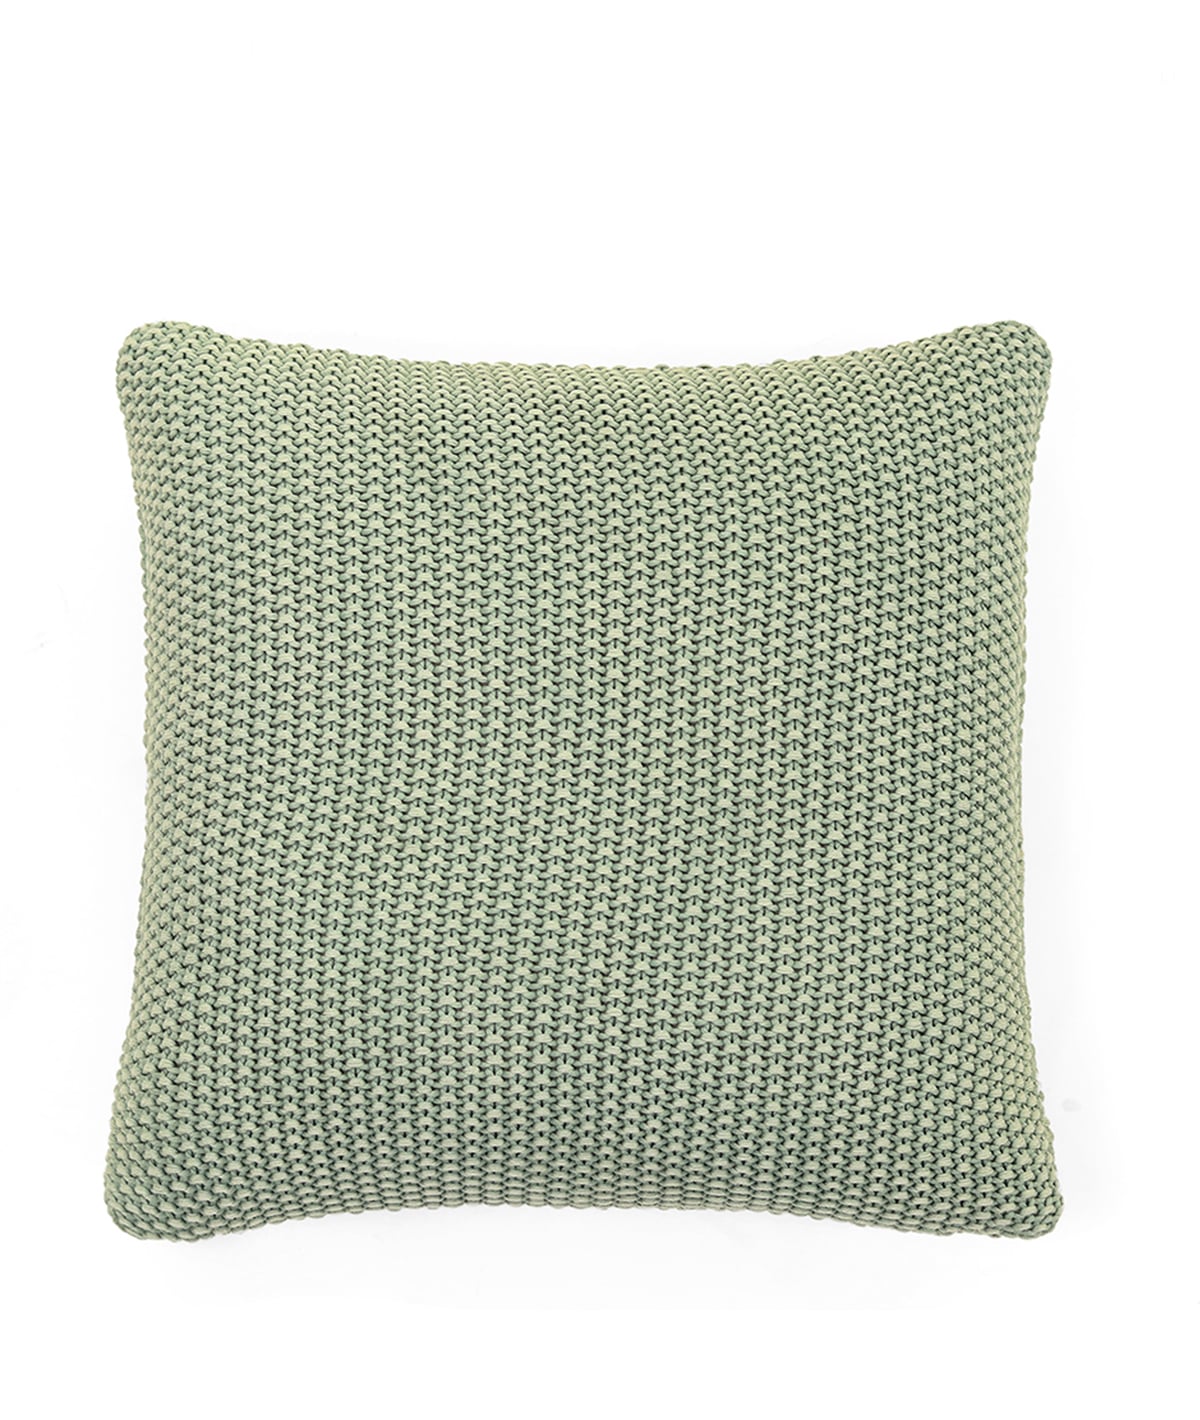 Knitted Purl Olive Cotton Knitted Decorative 16 X 16 Inches Cushion Cover